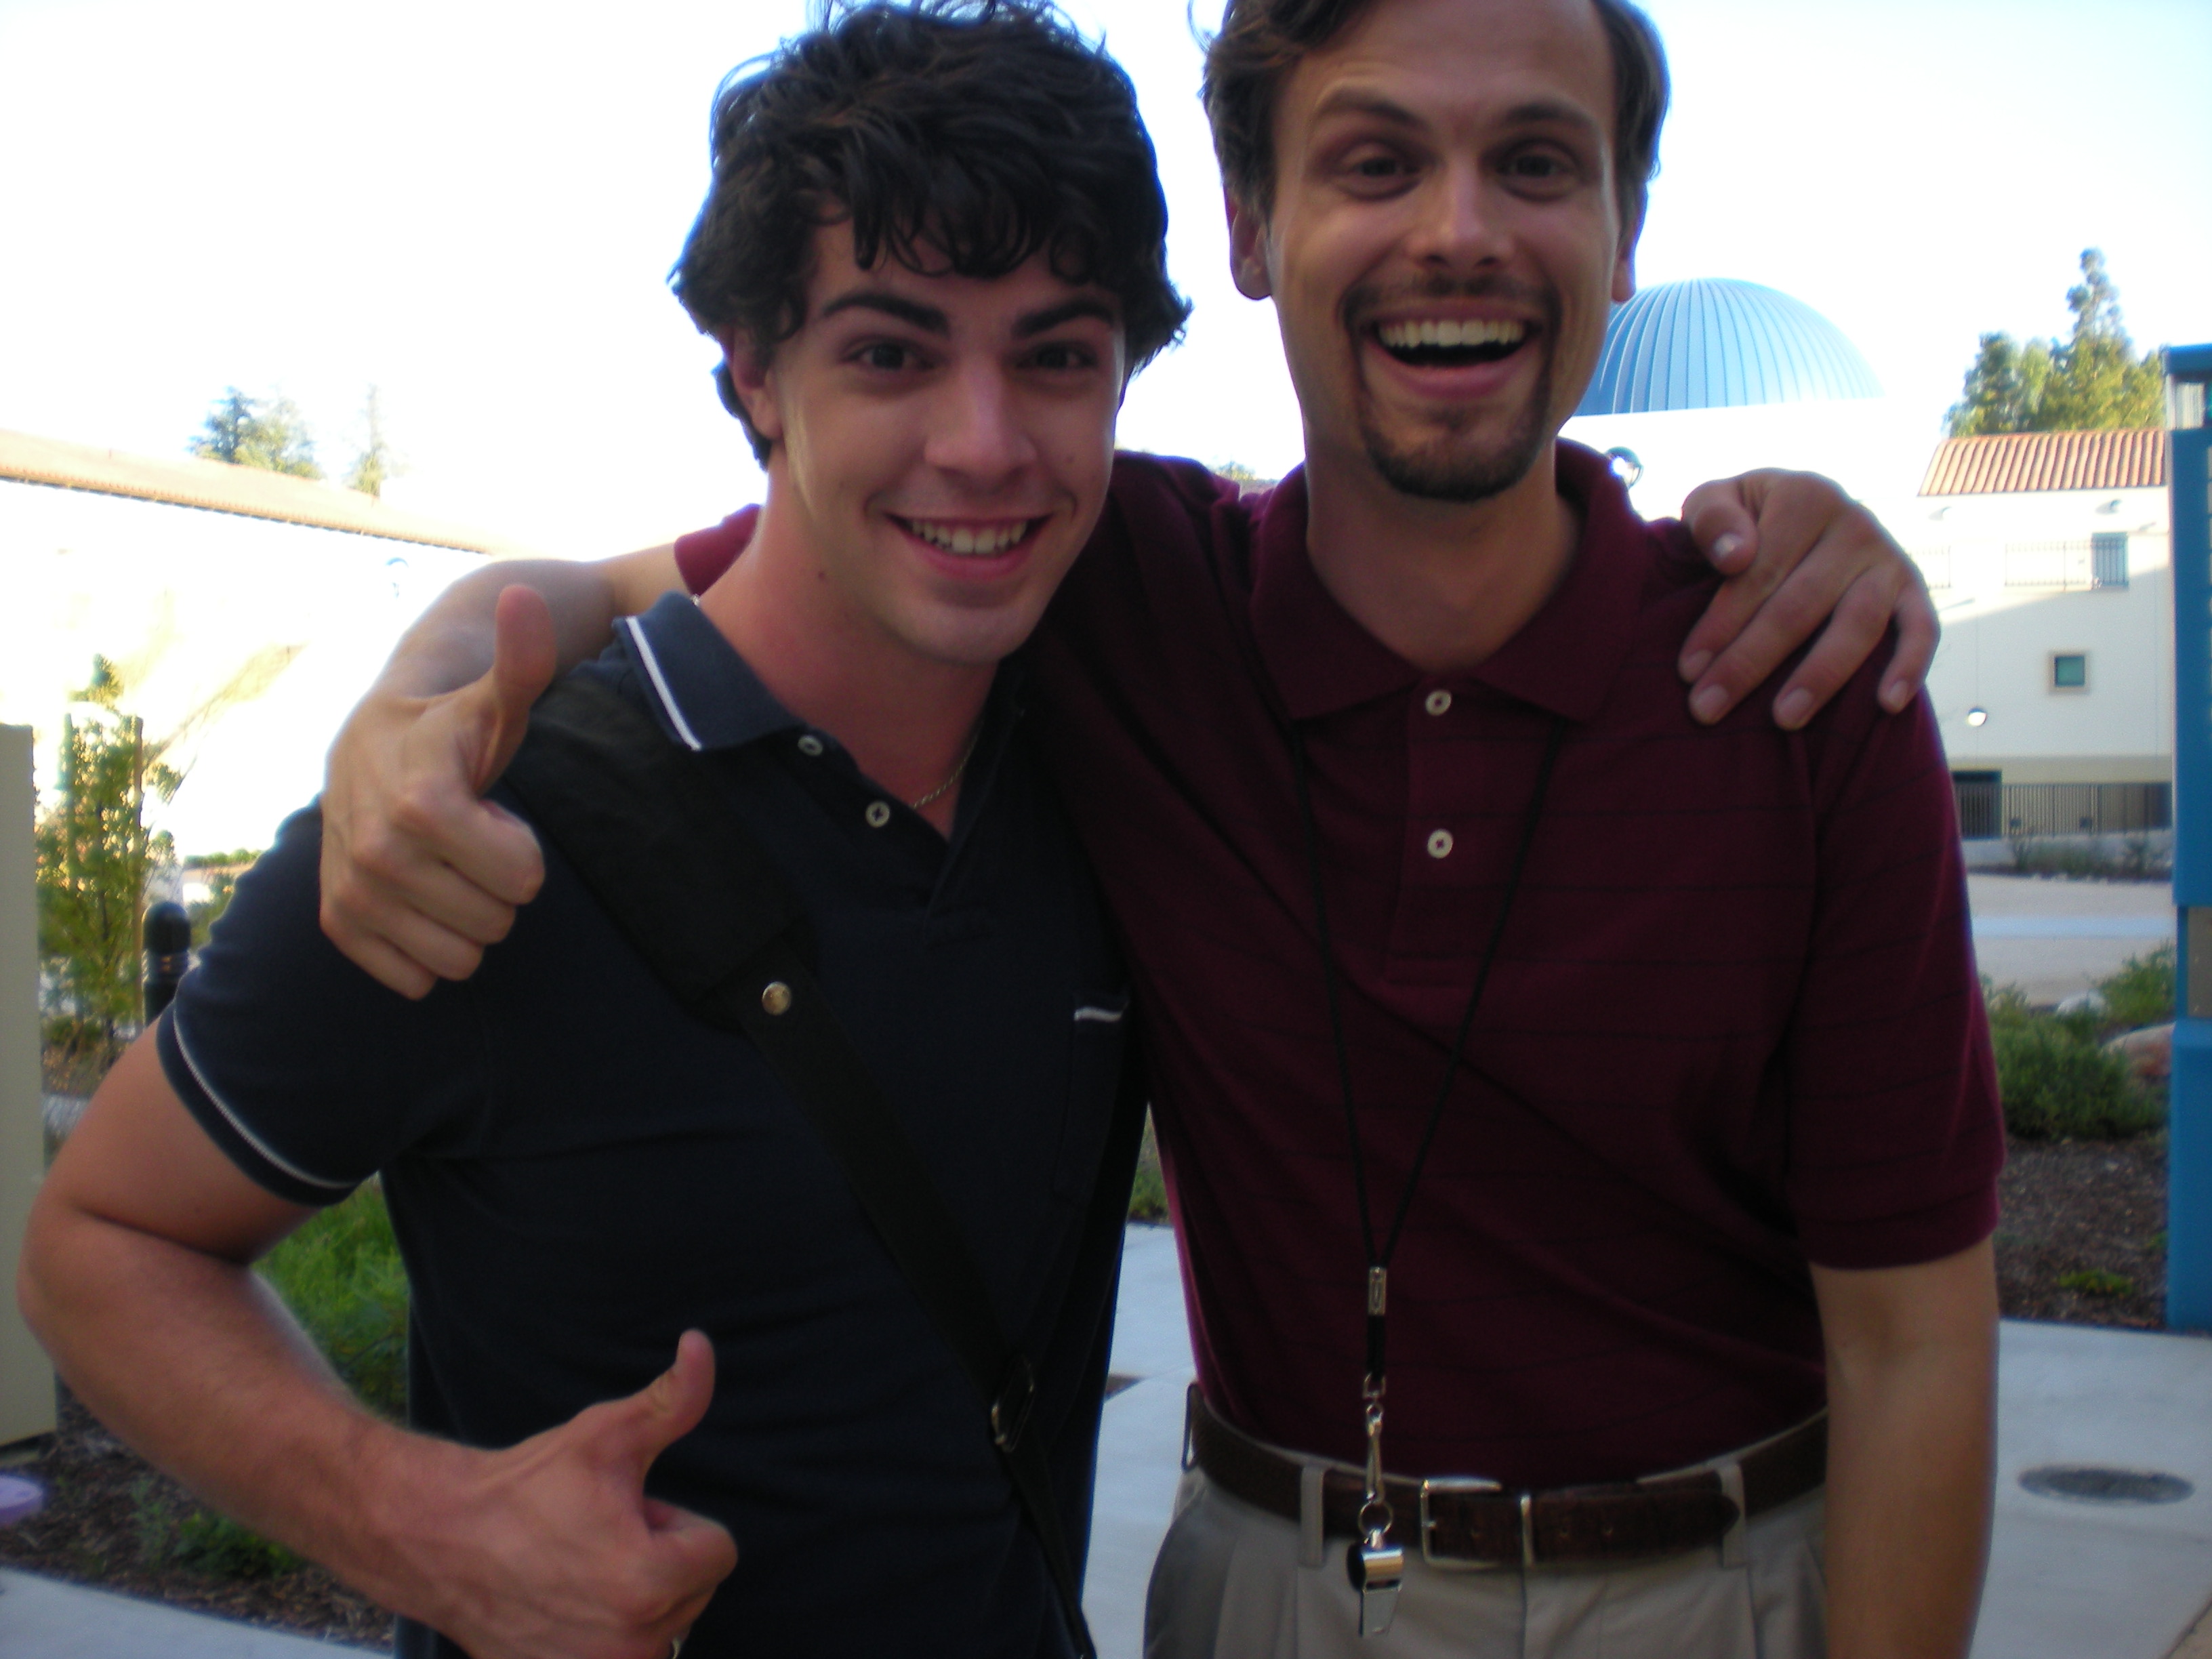 On the set of Excision with Matthew Gray Gubler.